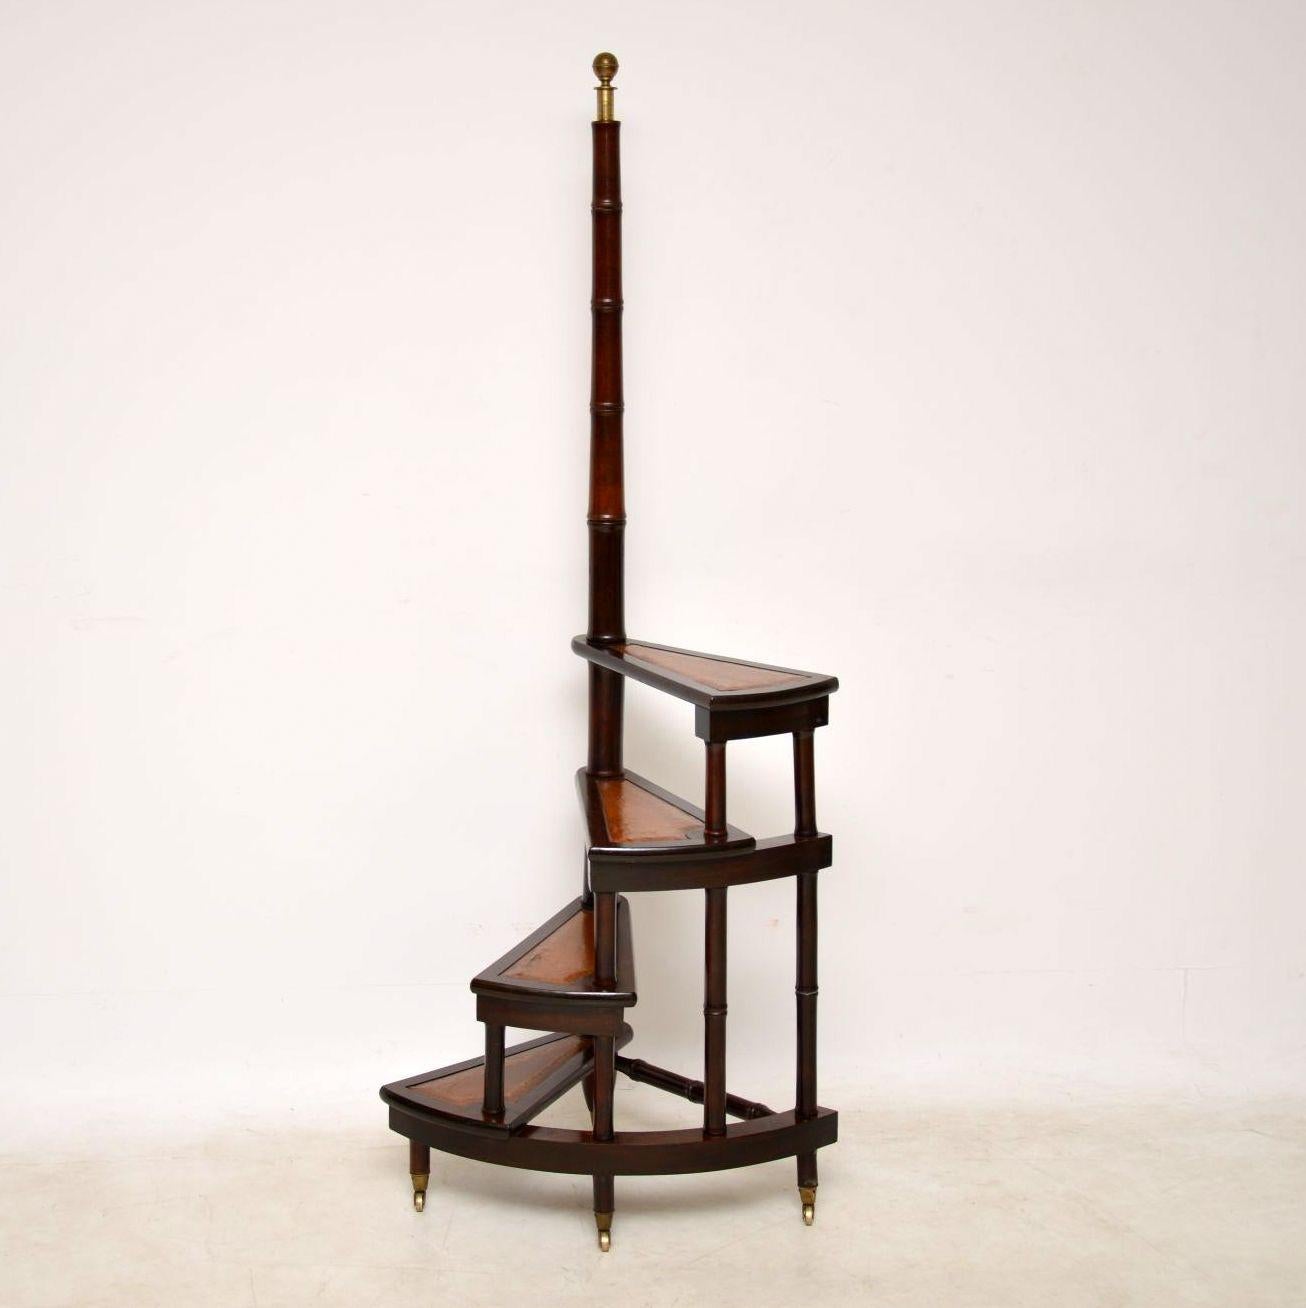 Antique spiral library steps in mahogany with tooled leather insets on all the steps. These steps are very well constructed, a decent size and quite useable. The top upright is well turned and has a brass finial on the top. The base is strengthened